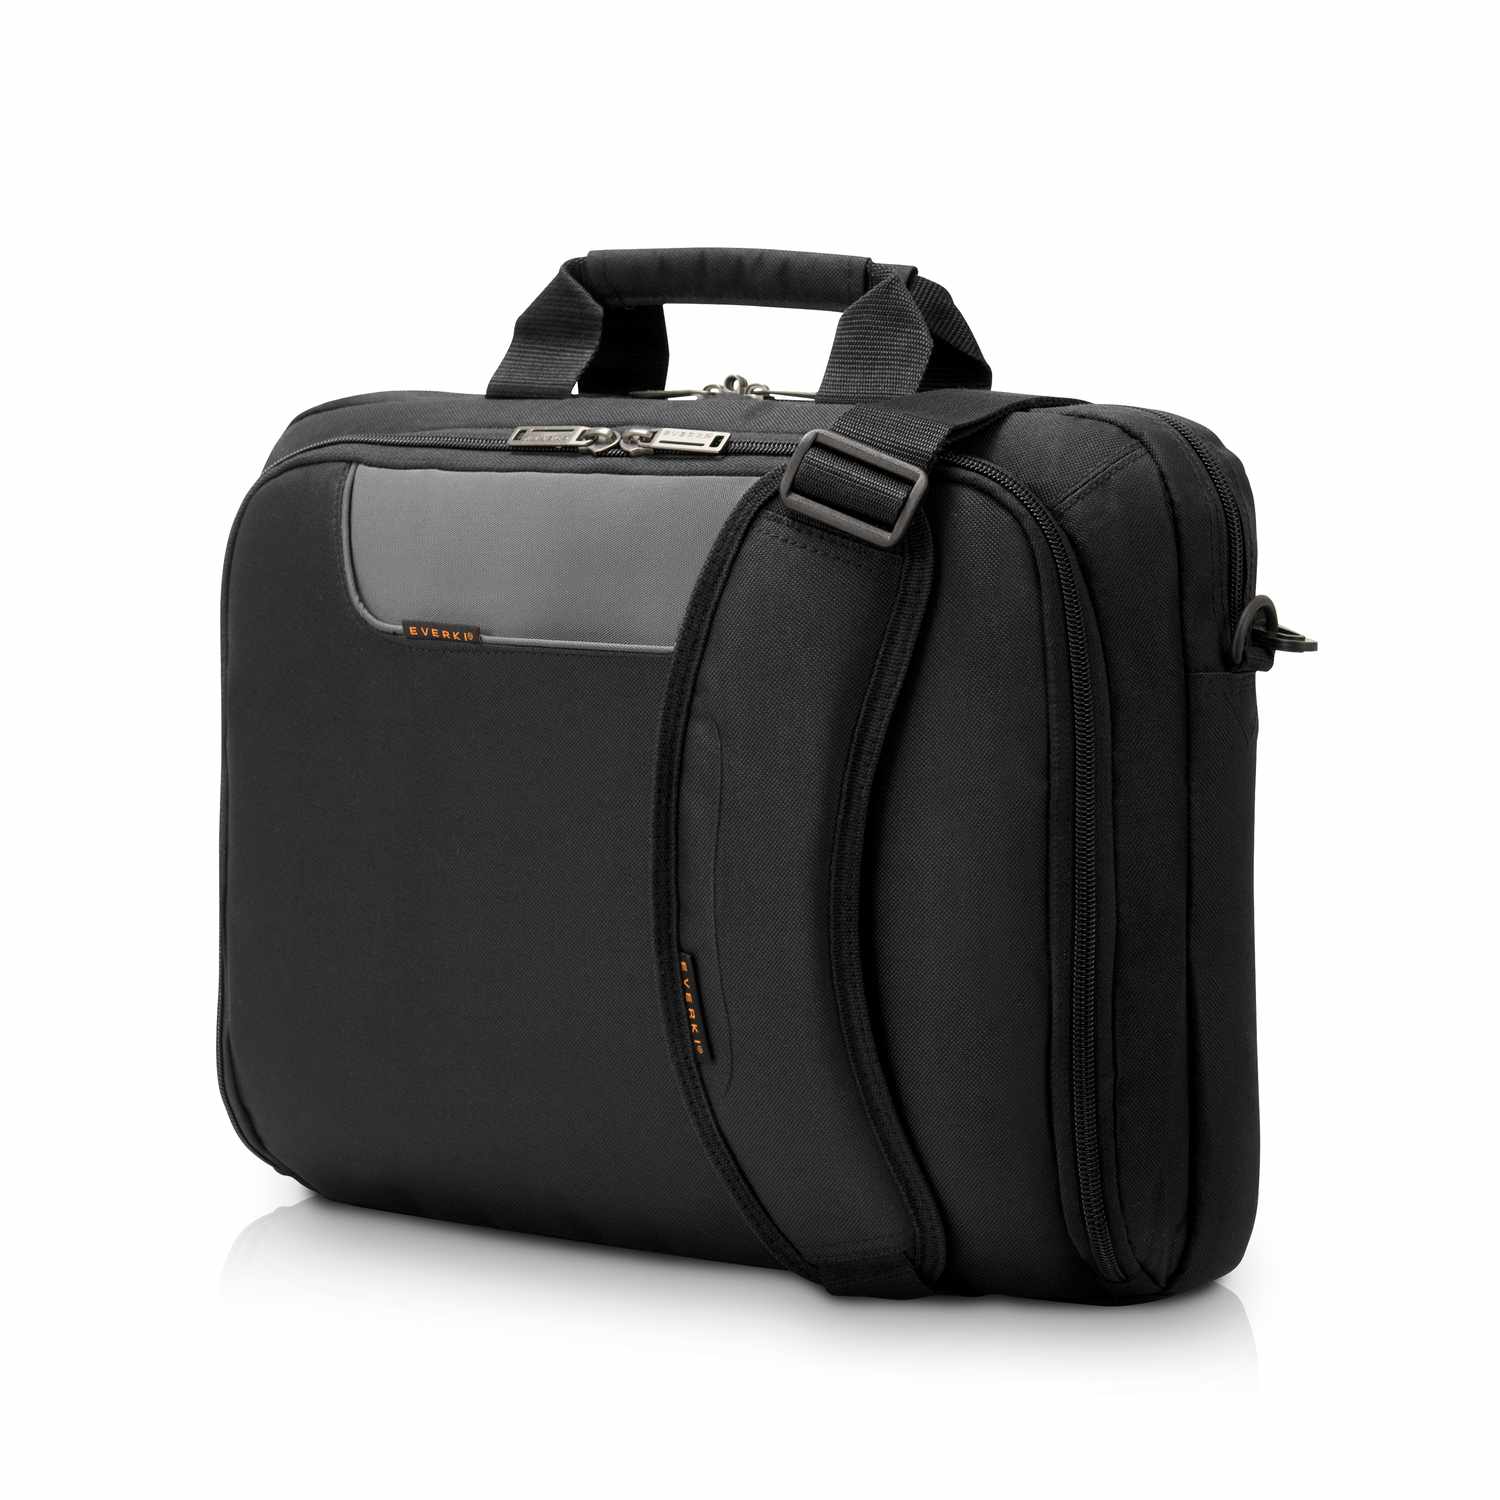 Advance ECO case for computers and tablets up to 16 inches